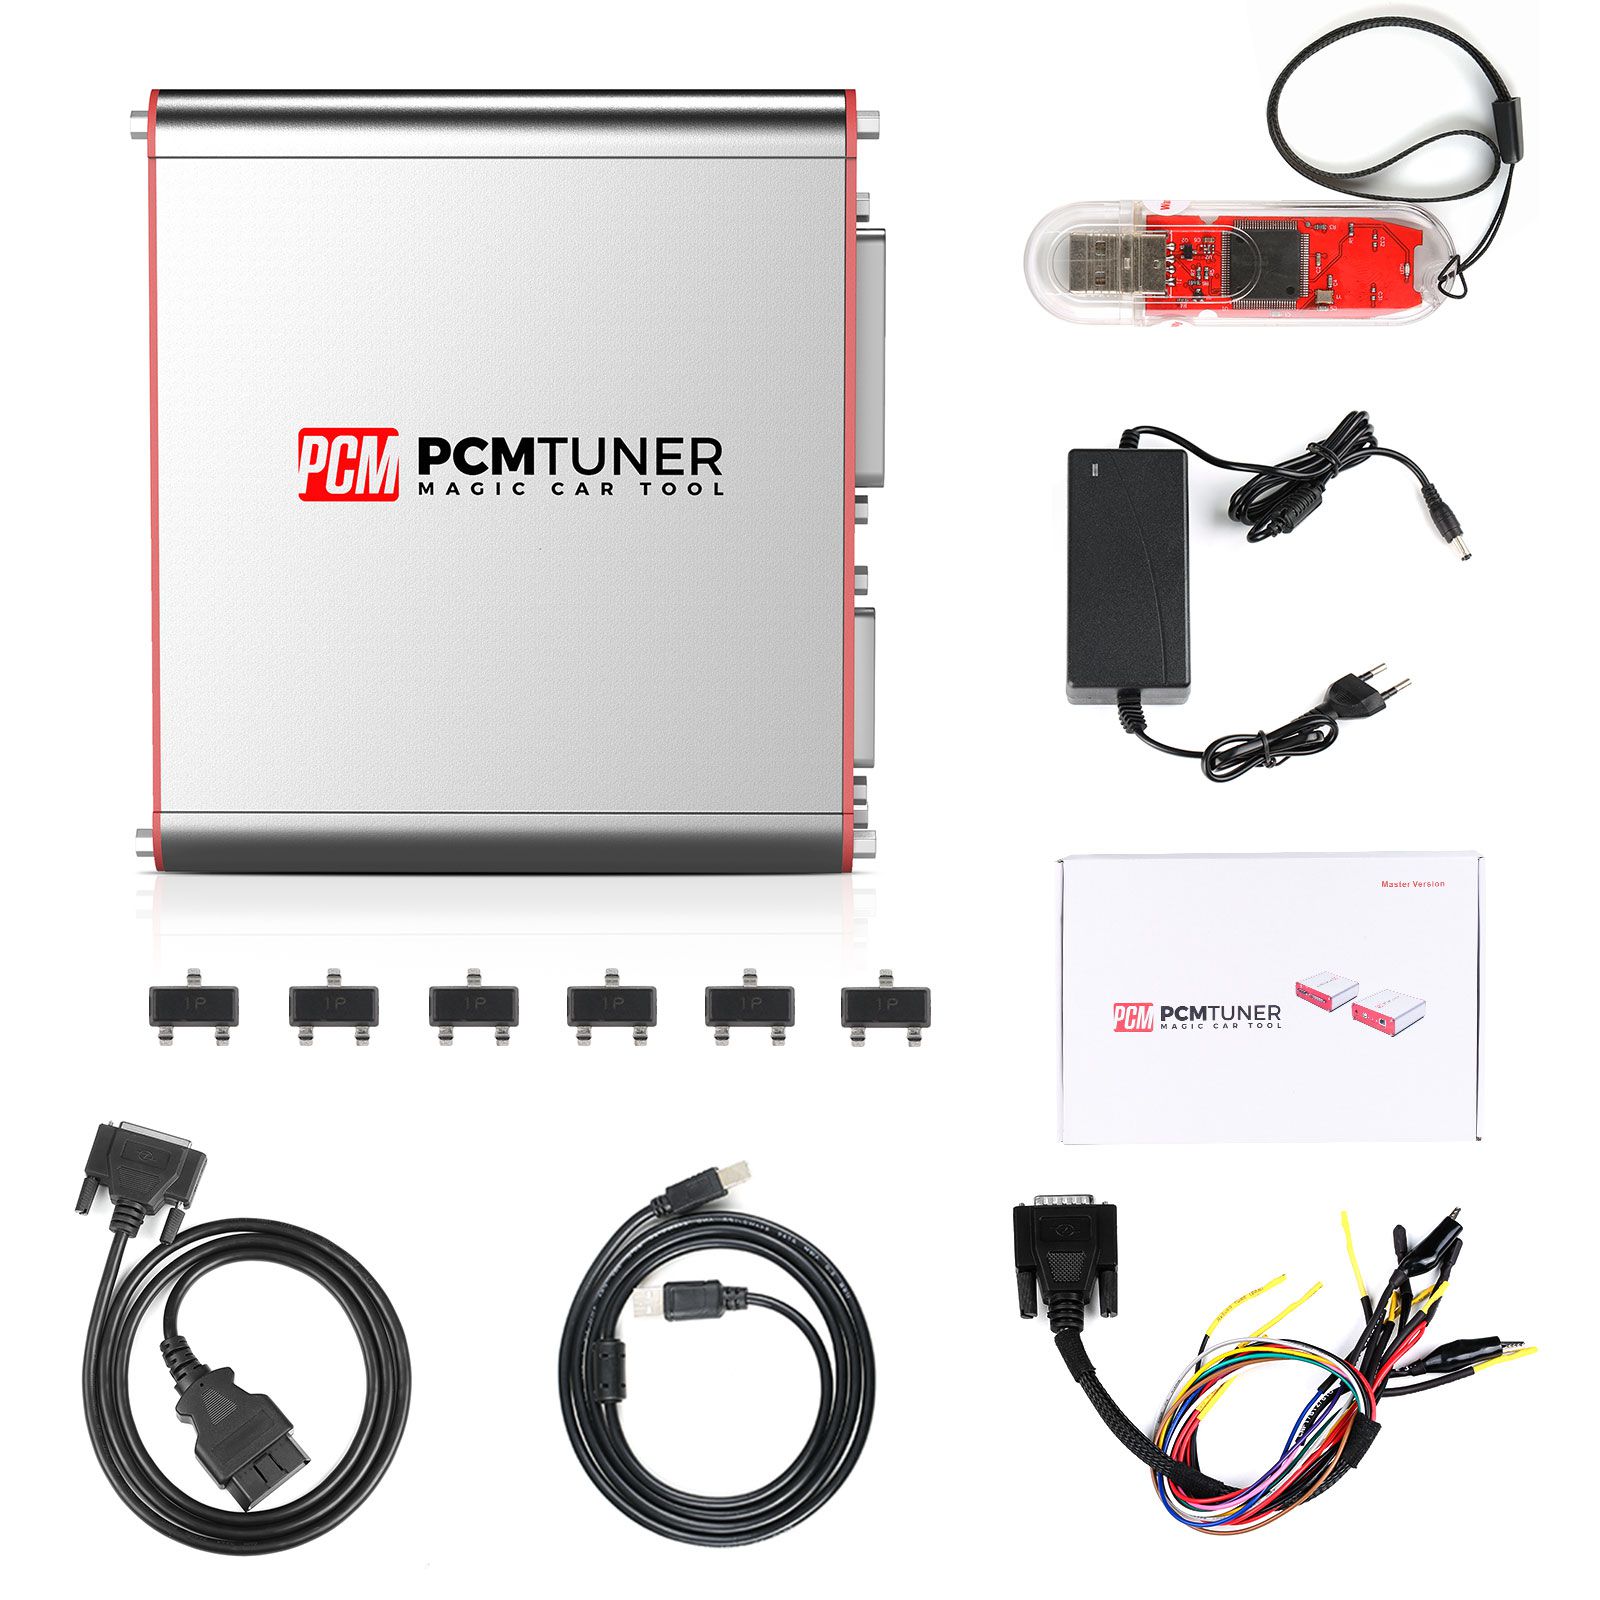 2022 Newest V1.26 PCMtuner ECU Programmer with 67 Modules Online Update Support Checksum and Pinout Diagram with Free Damaos for Users